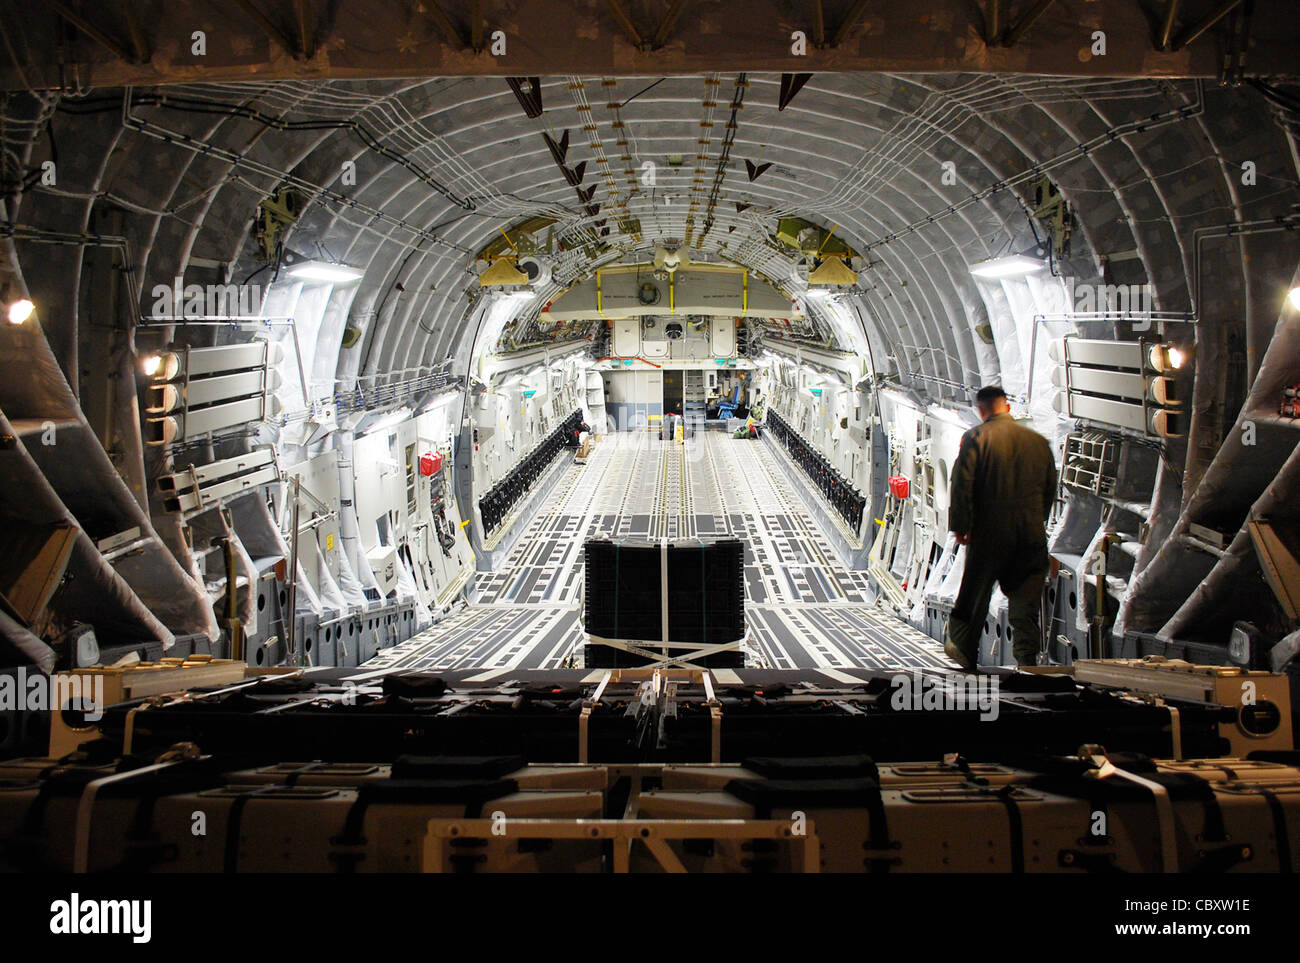 Master Sgt. Michael Lang inspects the cargo area of the newest C-17 Globemaster III delivered to Charleston Air Force Base, S.C., Oct. 28, 2009. Accompanied by an all-Reserve crew, Lt. Gen. Charles Stenner Jr., commander of Air Force Reserve Command, flew the aircraft to Charleston. Stock Photo